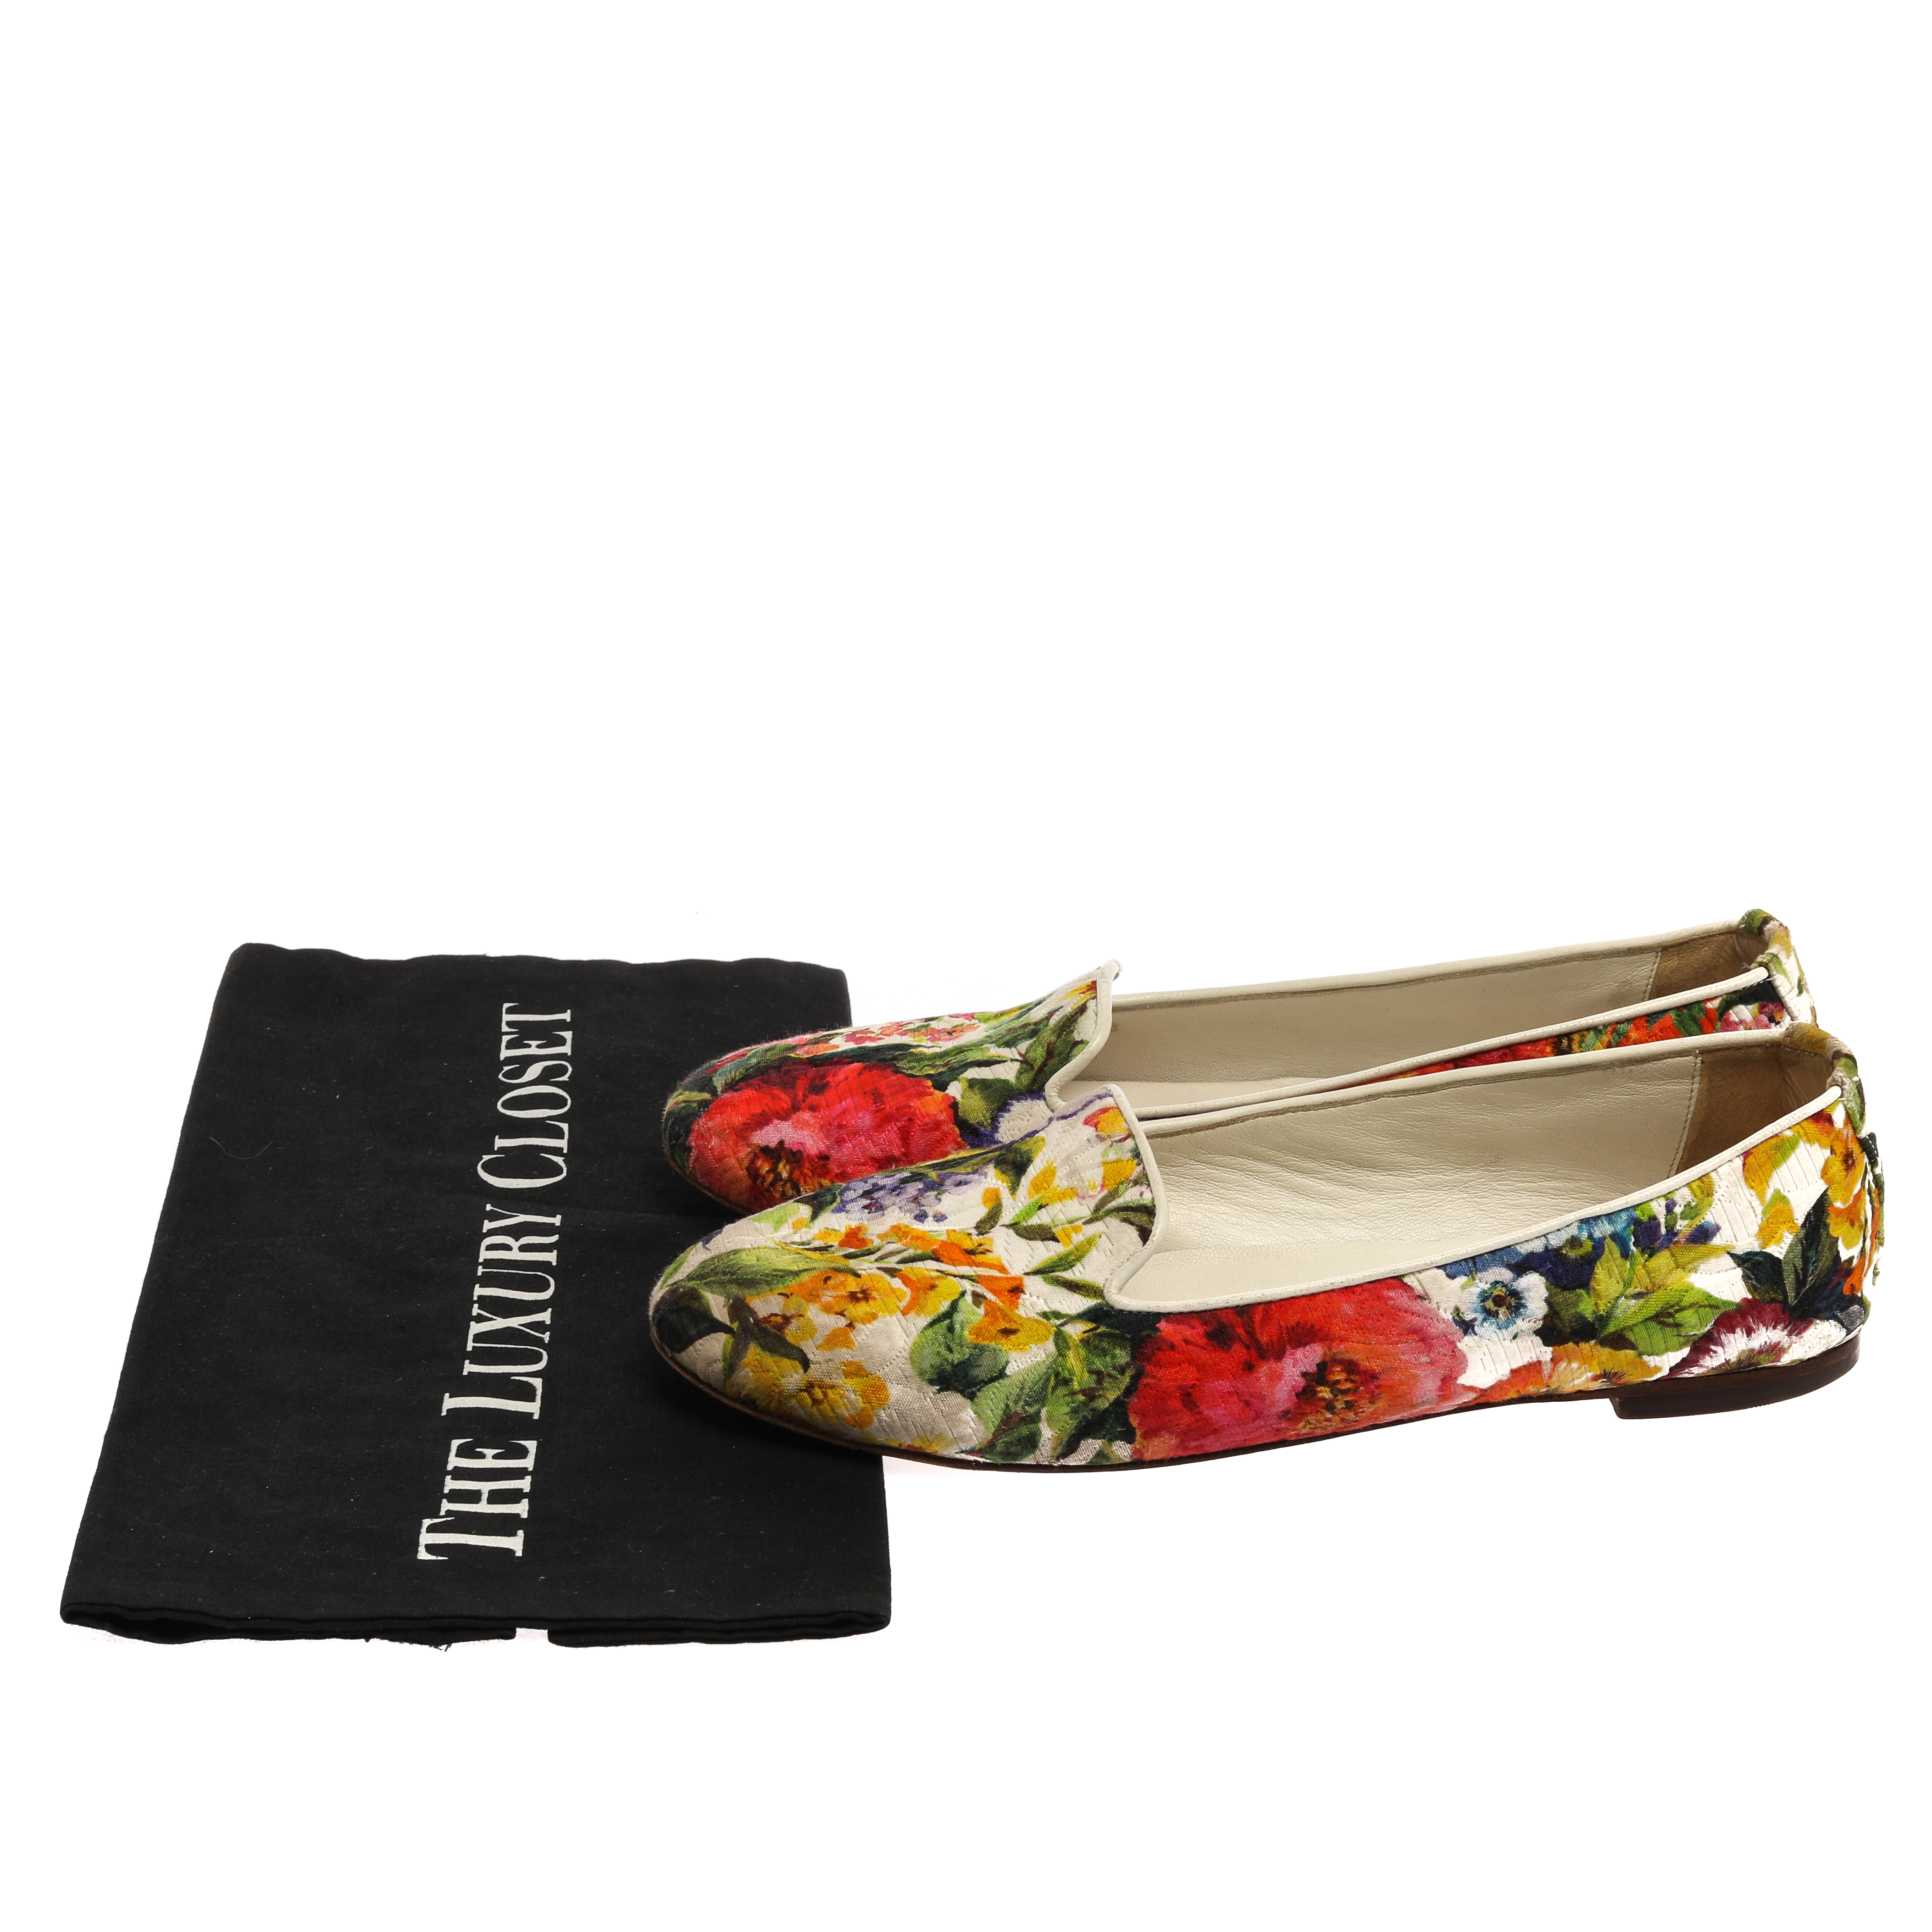 Dolce & Gabbana Multicolor Floral Print Brocade Flat Smoking Slippers Size 38